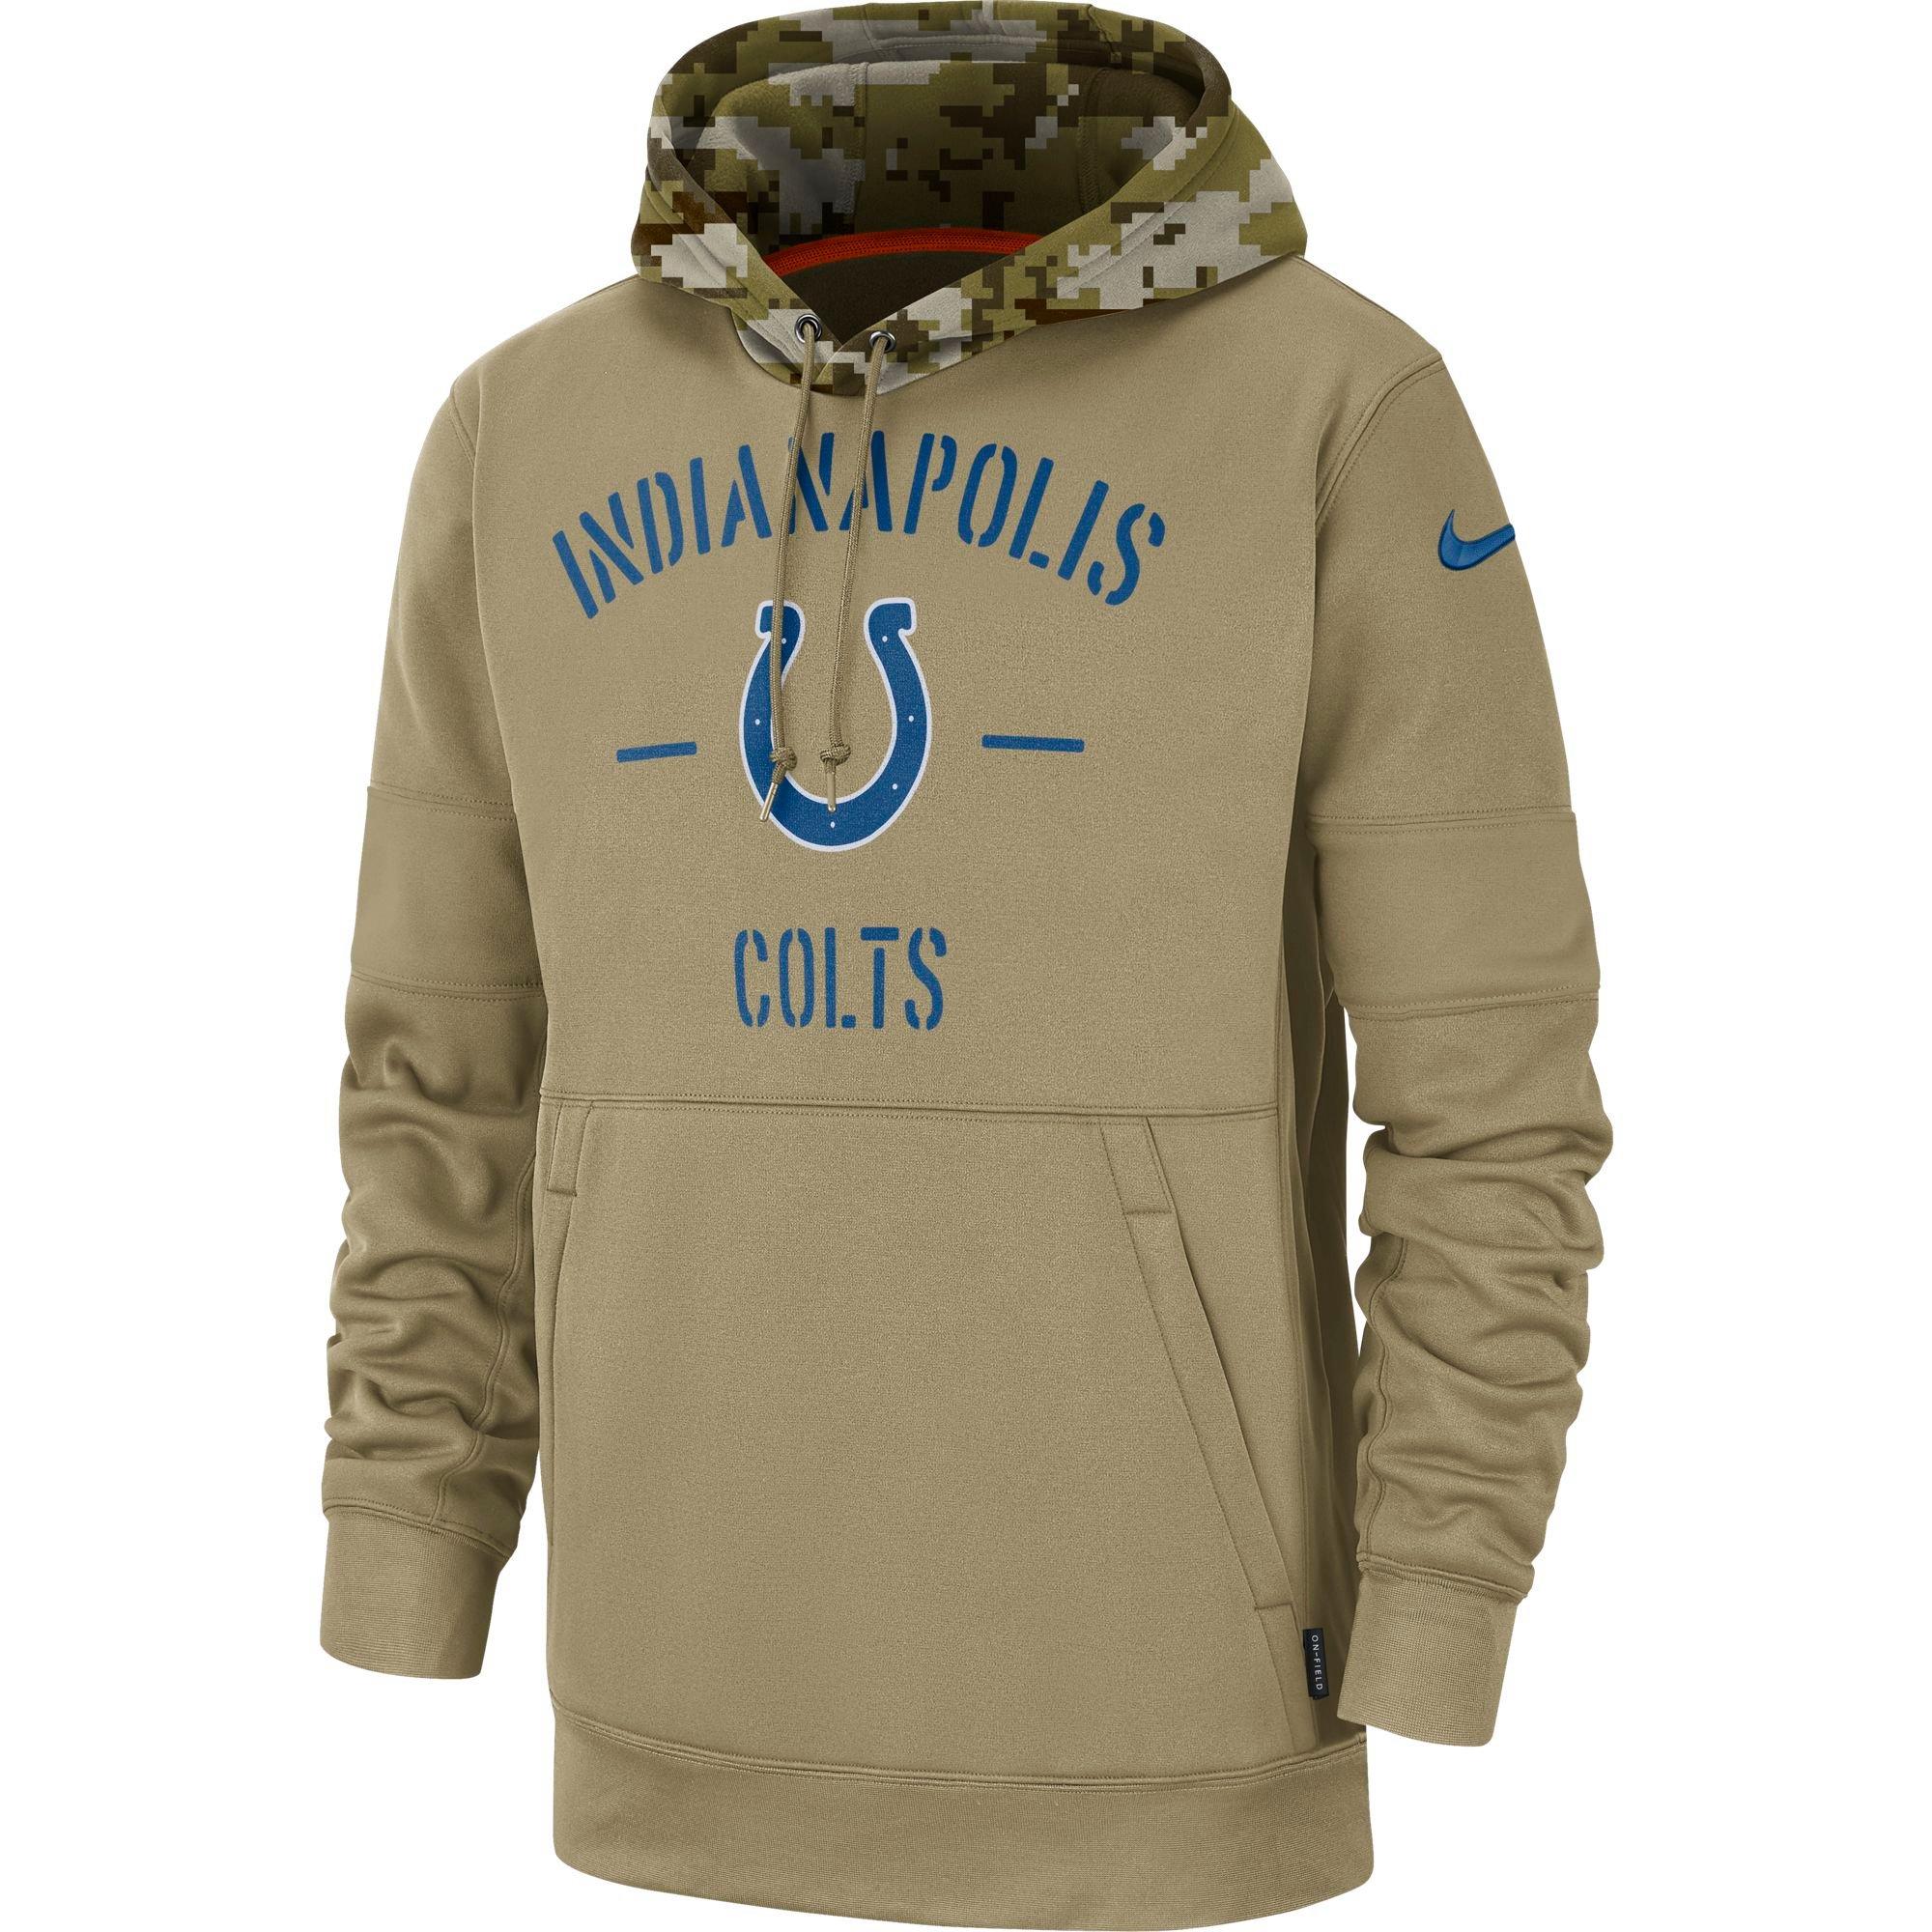 Nike Men's Indianapolis Colts Salute to 